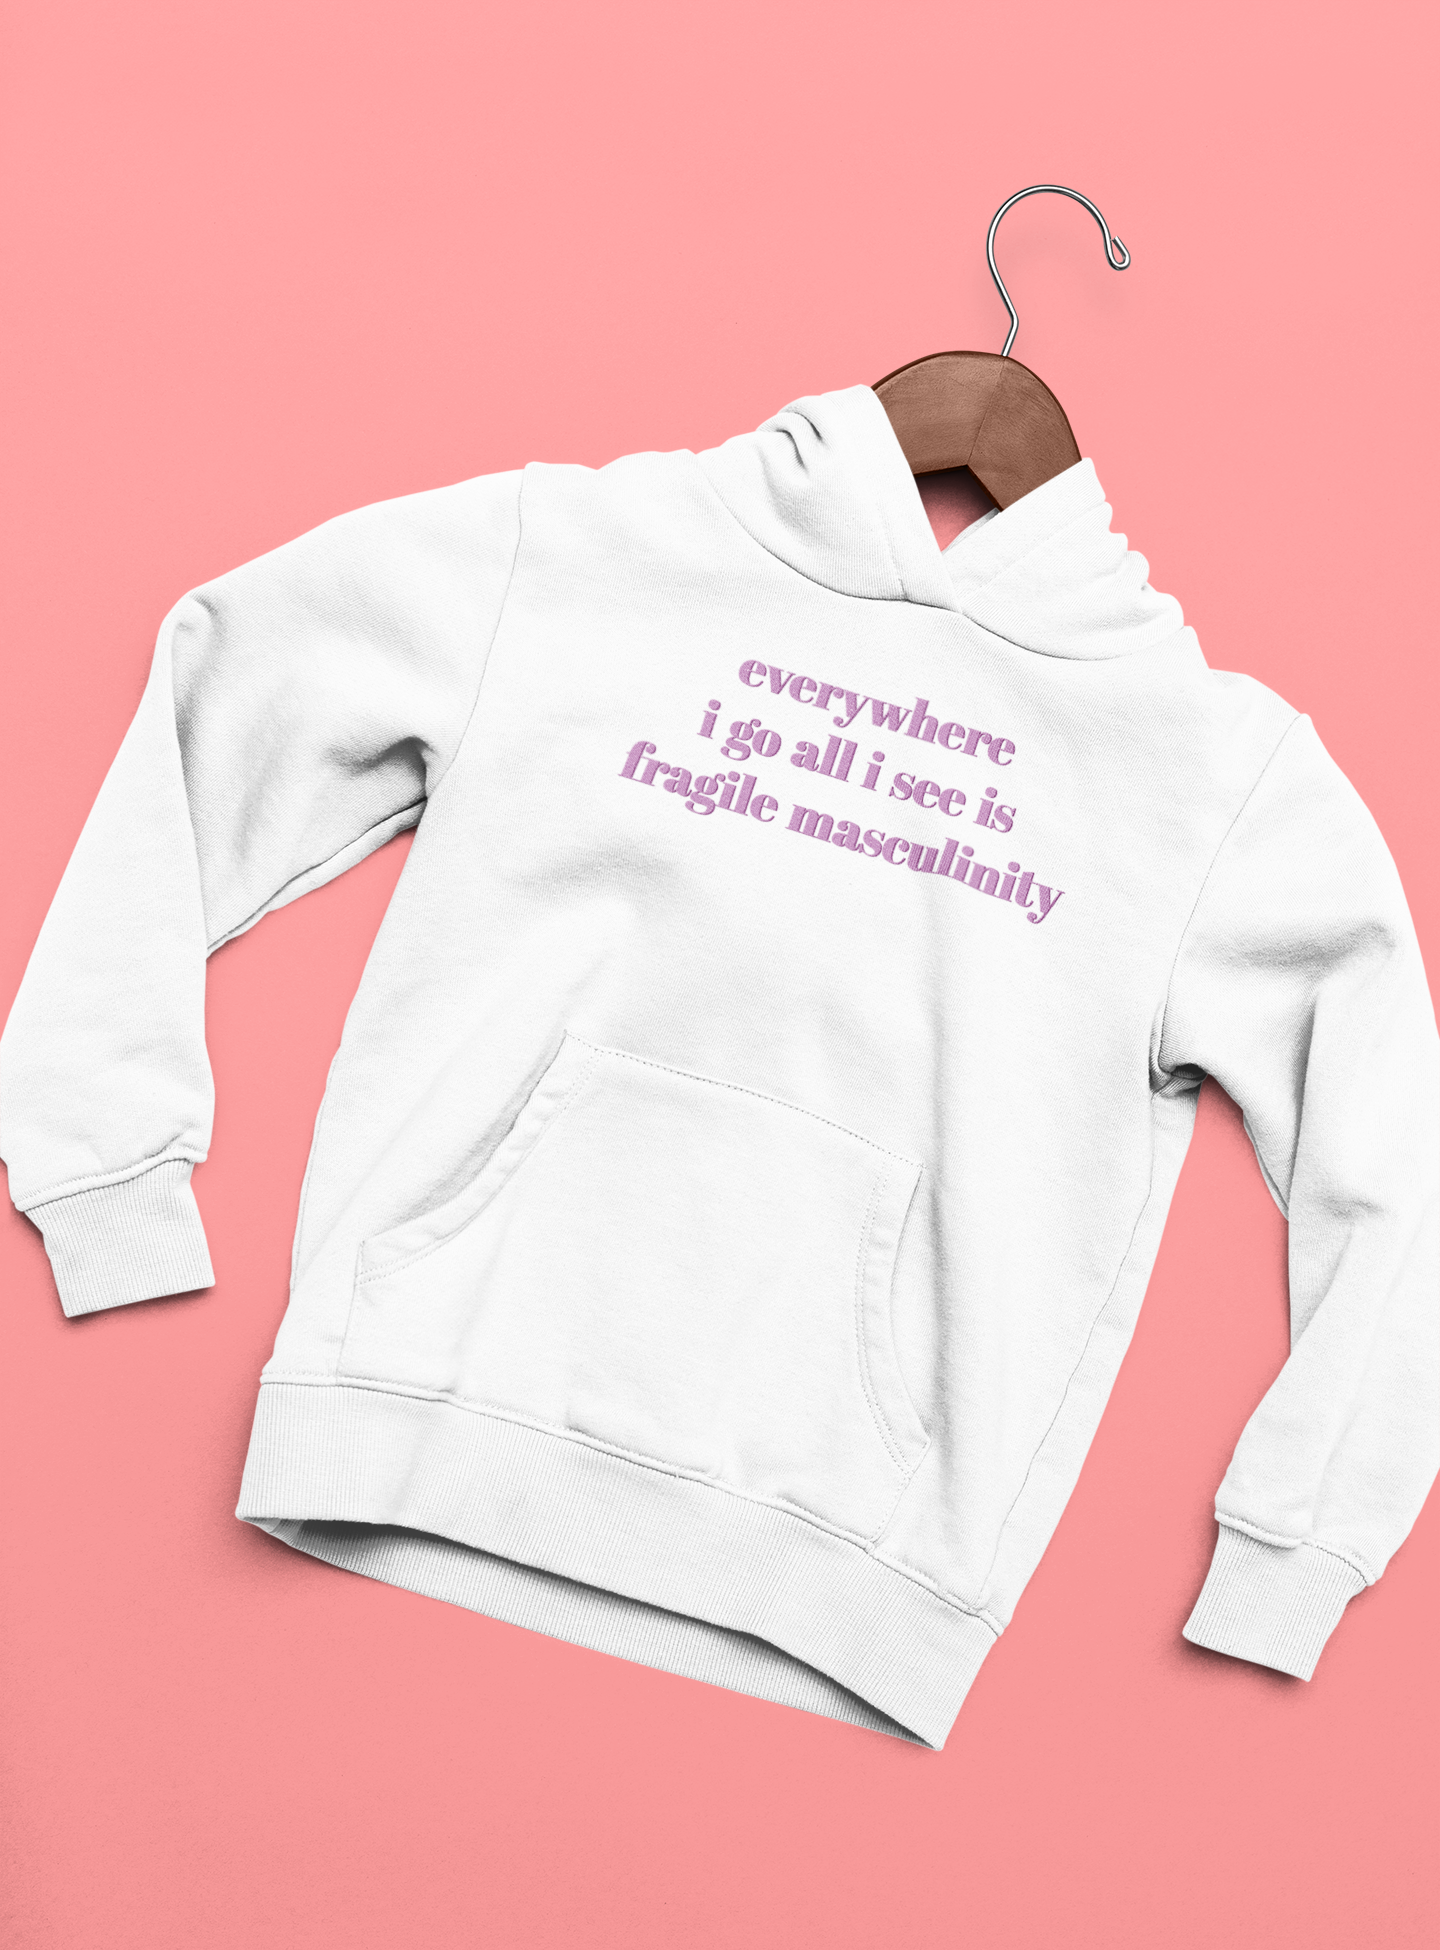 Everywhere I Go All I See Is Fragile Masculinity Unisex Feminist Hoodie -  Shop Women's Rights T-shirts – Feminist Trash Store